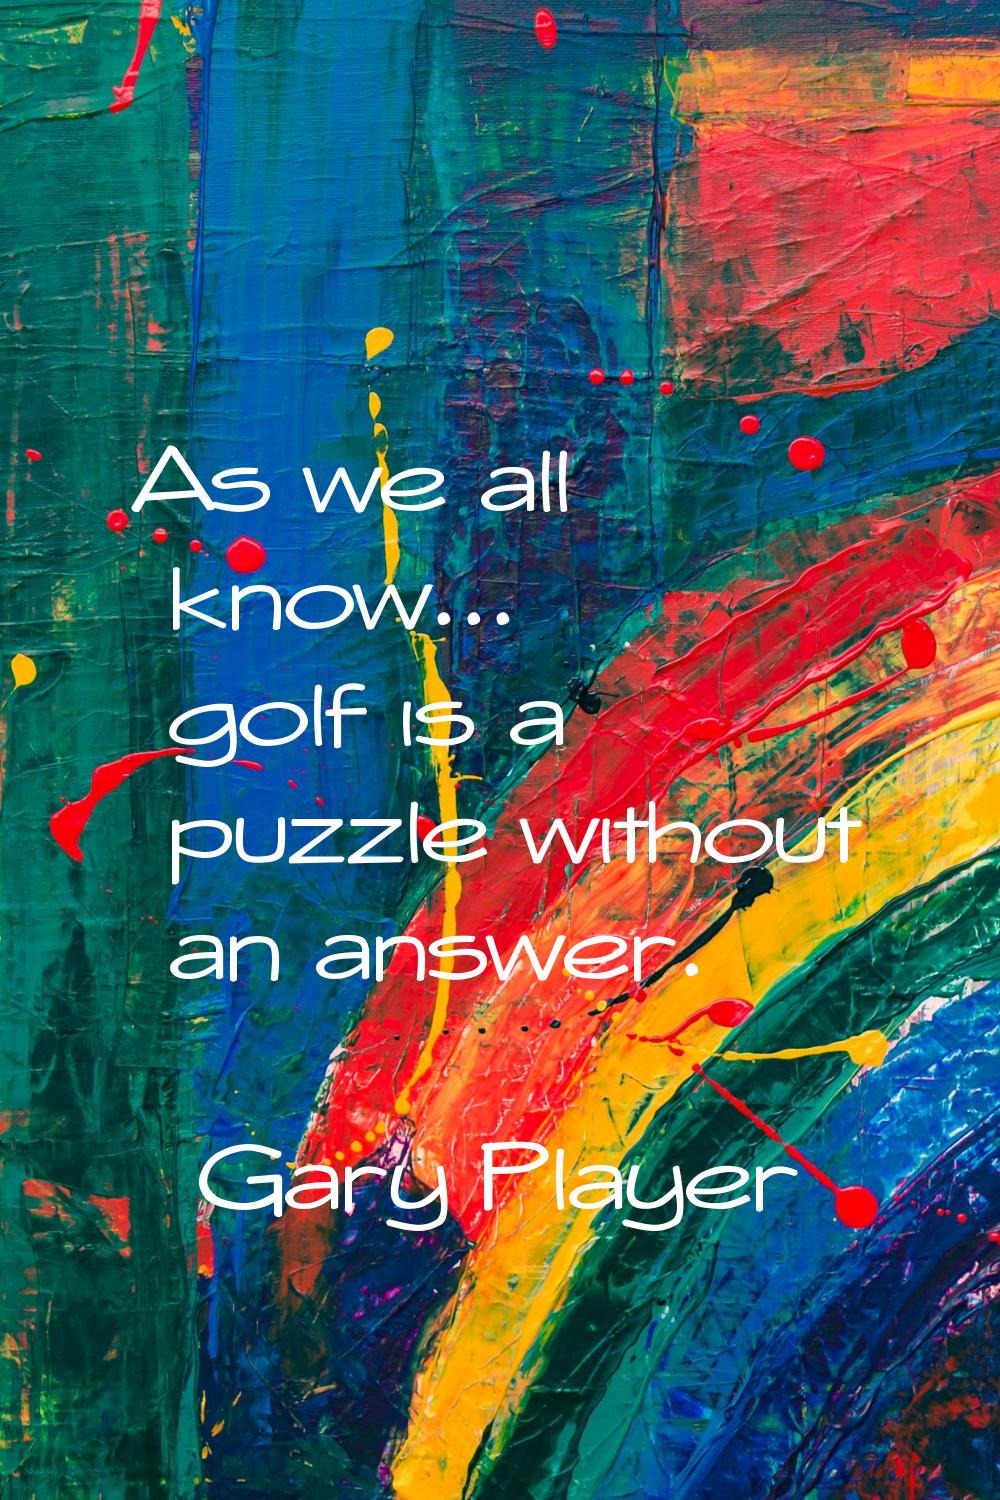 As we all know... golf is a puzzle without an answer.